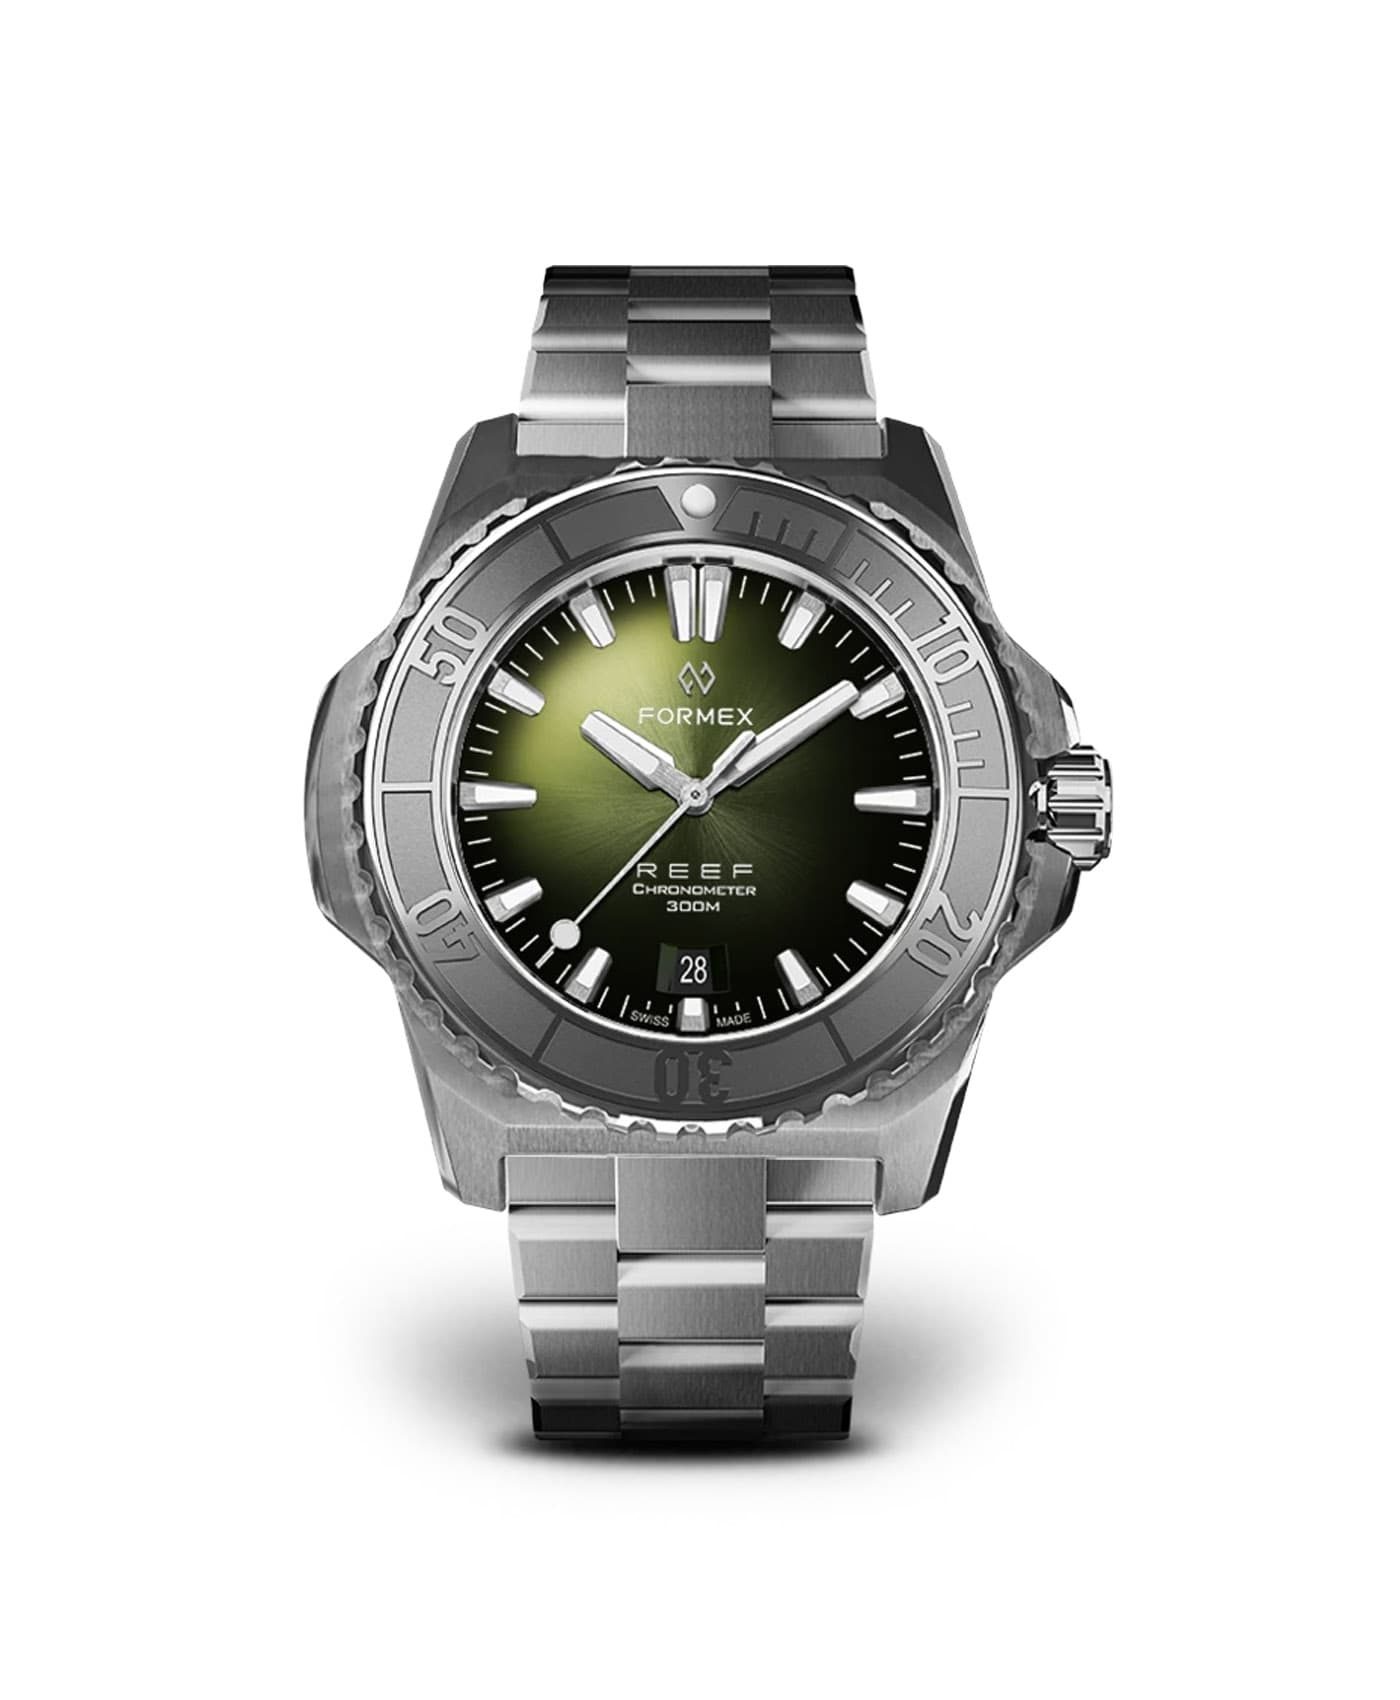 Formex - Reef - Automatic Chronometer COSC 300m_Green Dial Grey Bezel